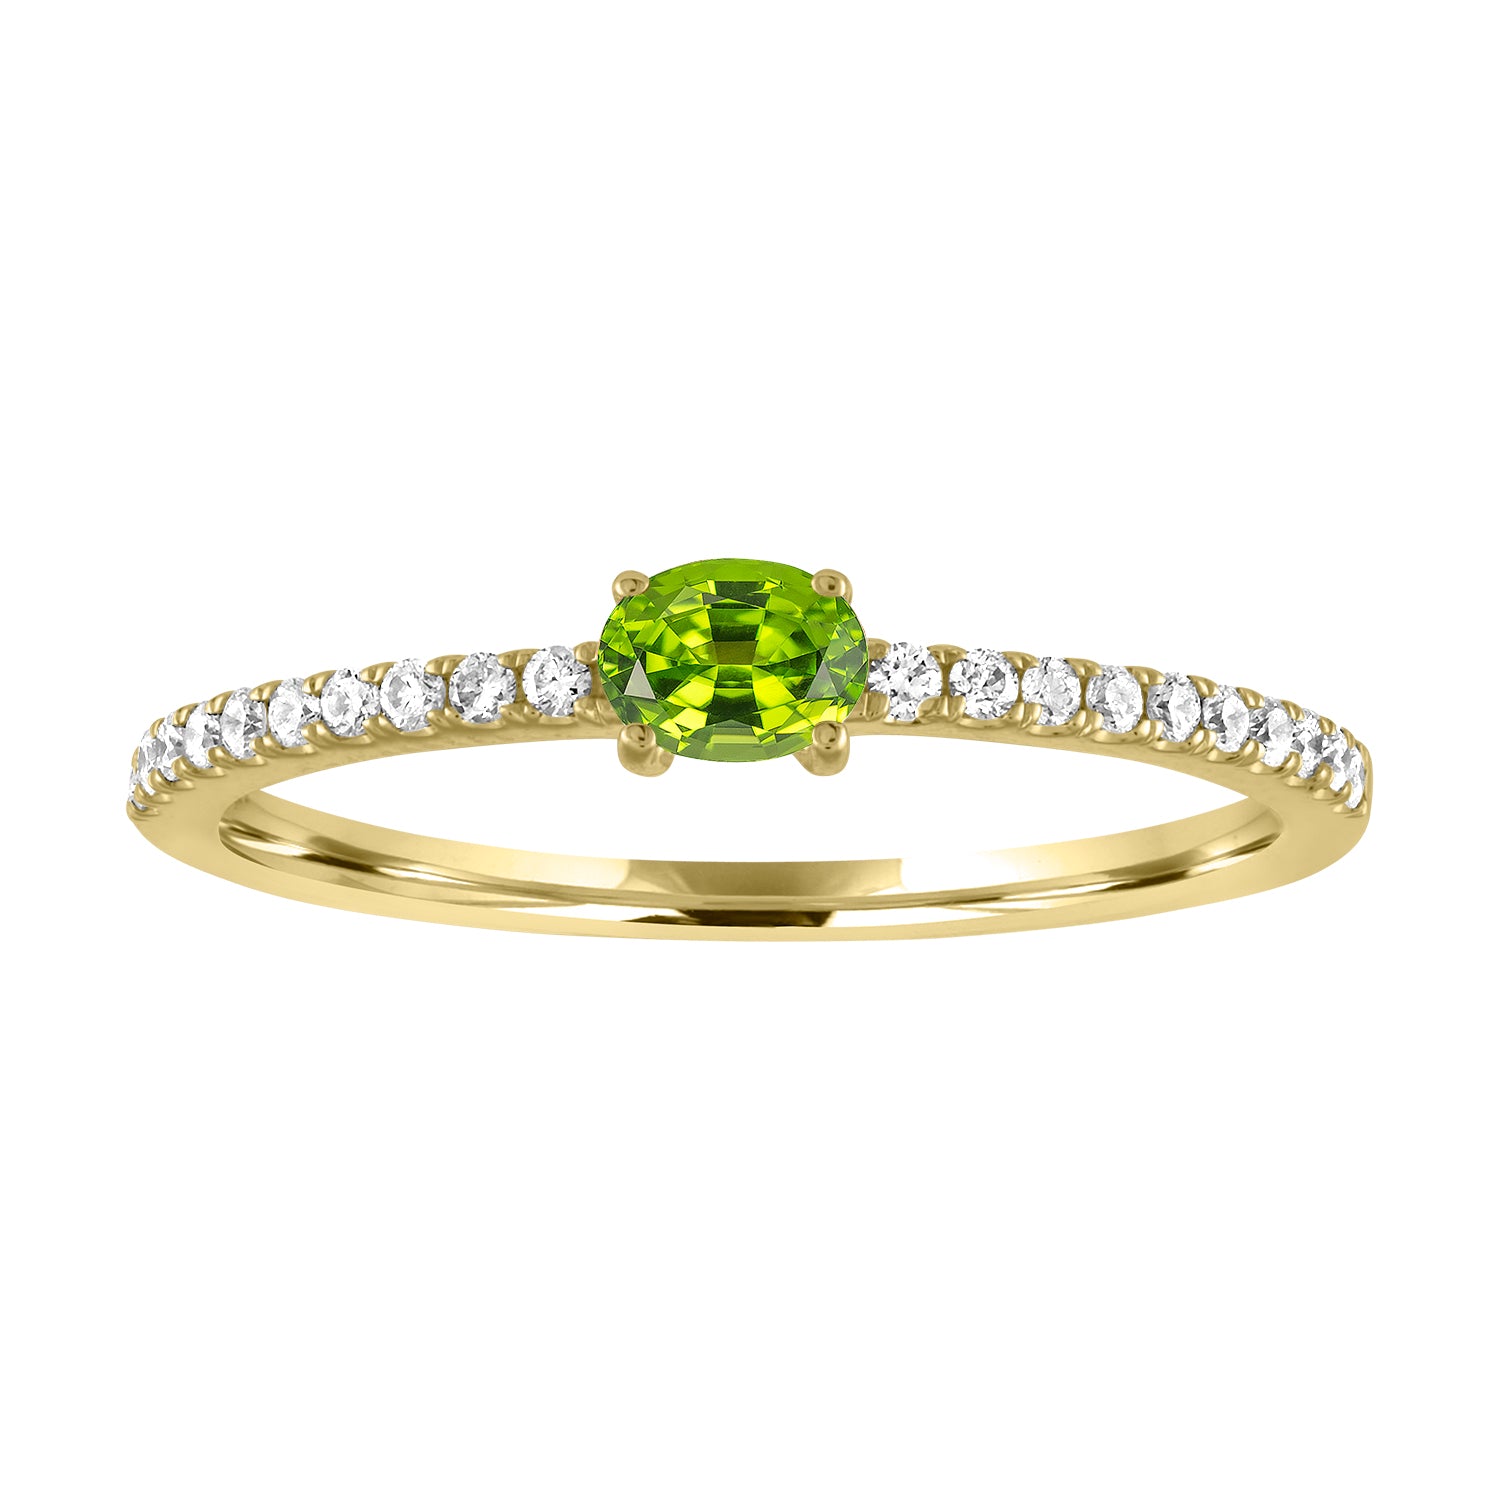 Yellow gold skinny band with an oval peridot in the center and round diamonds along the shank.